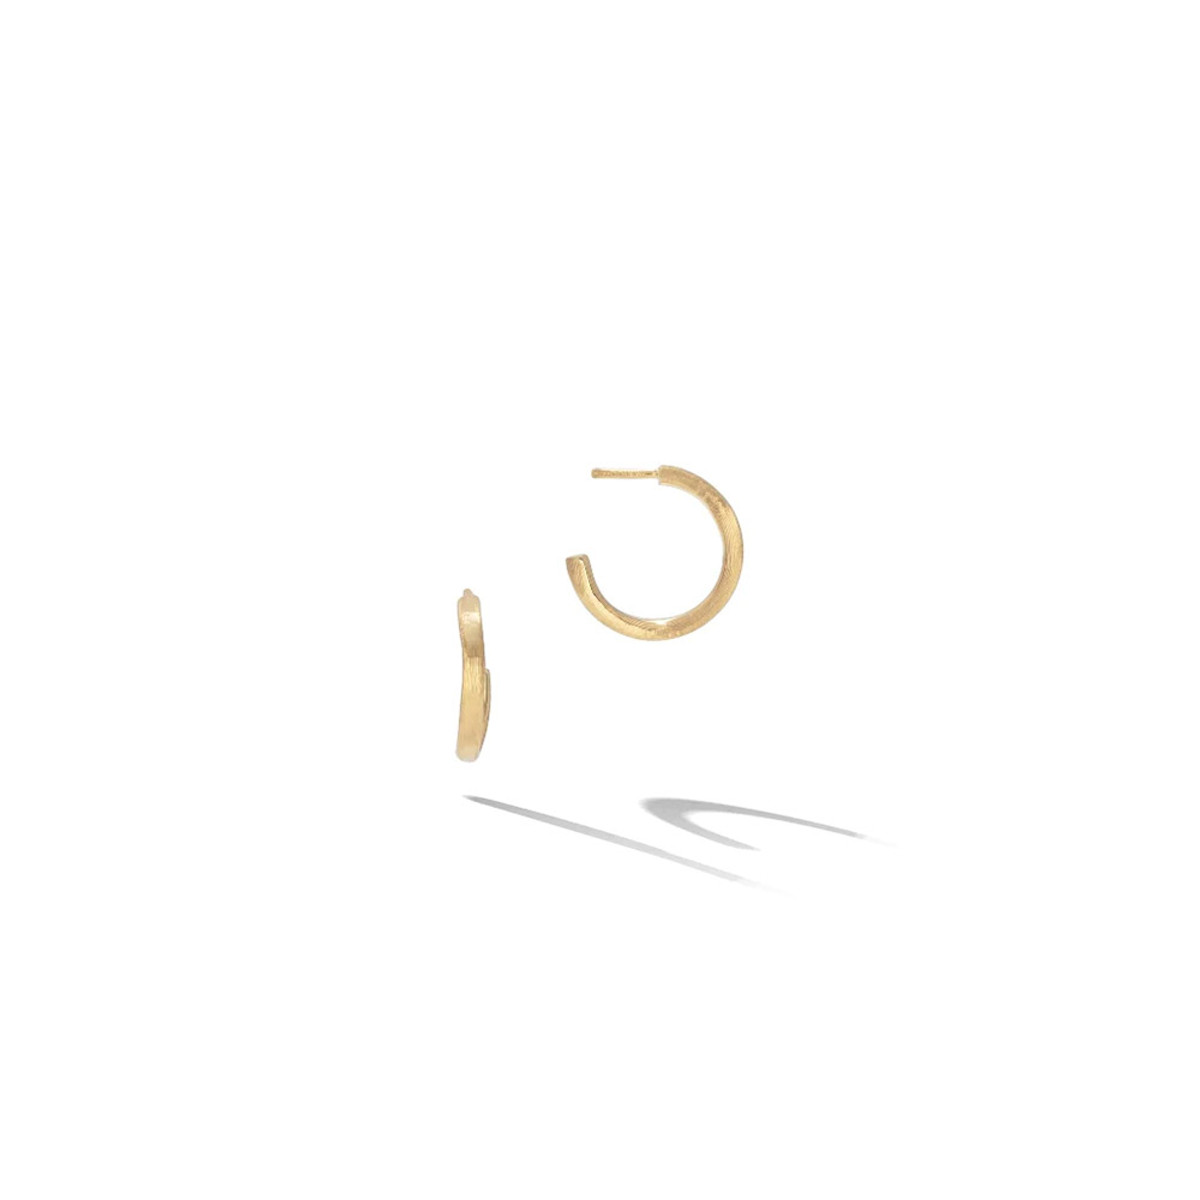 Marco Bicego Jaipur Collection 18K Yellow Gold Small Hoop Earrings-47096